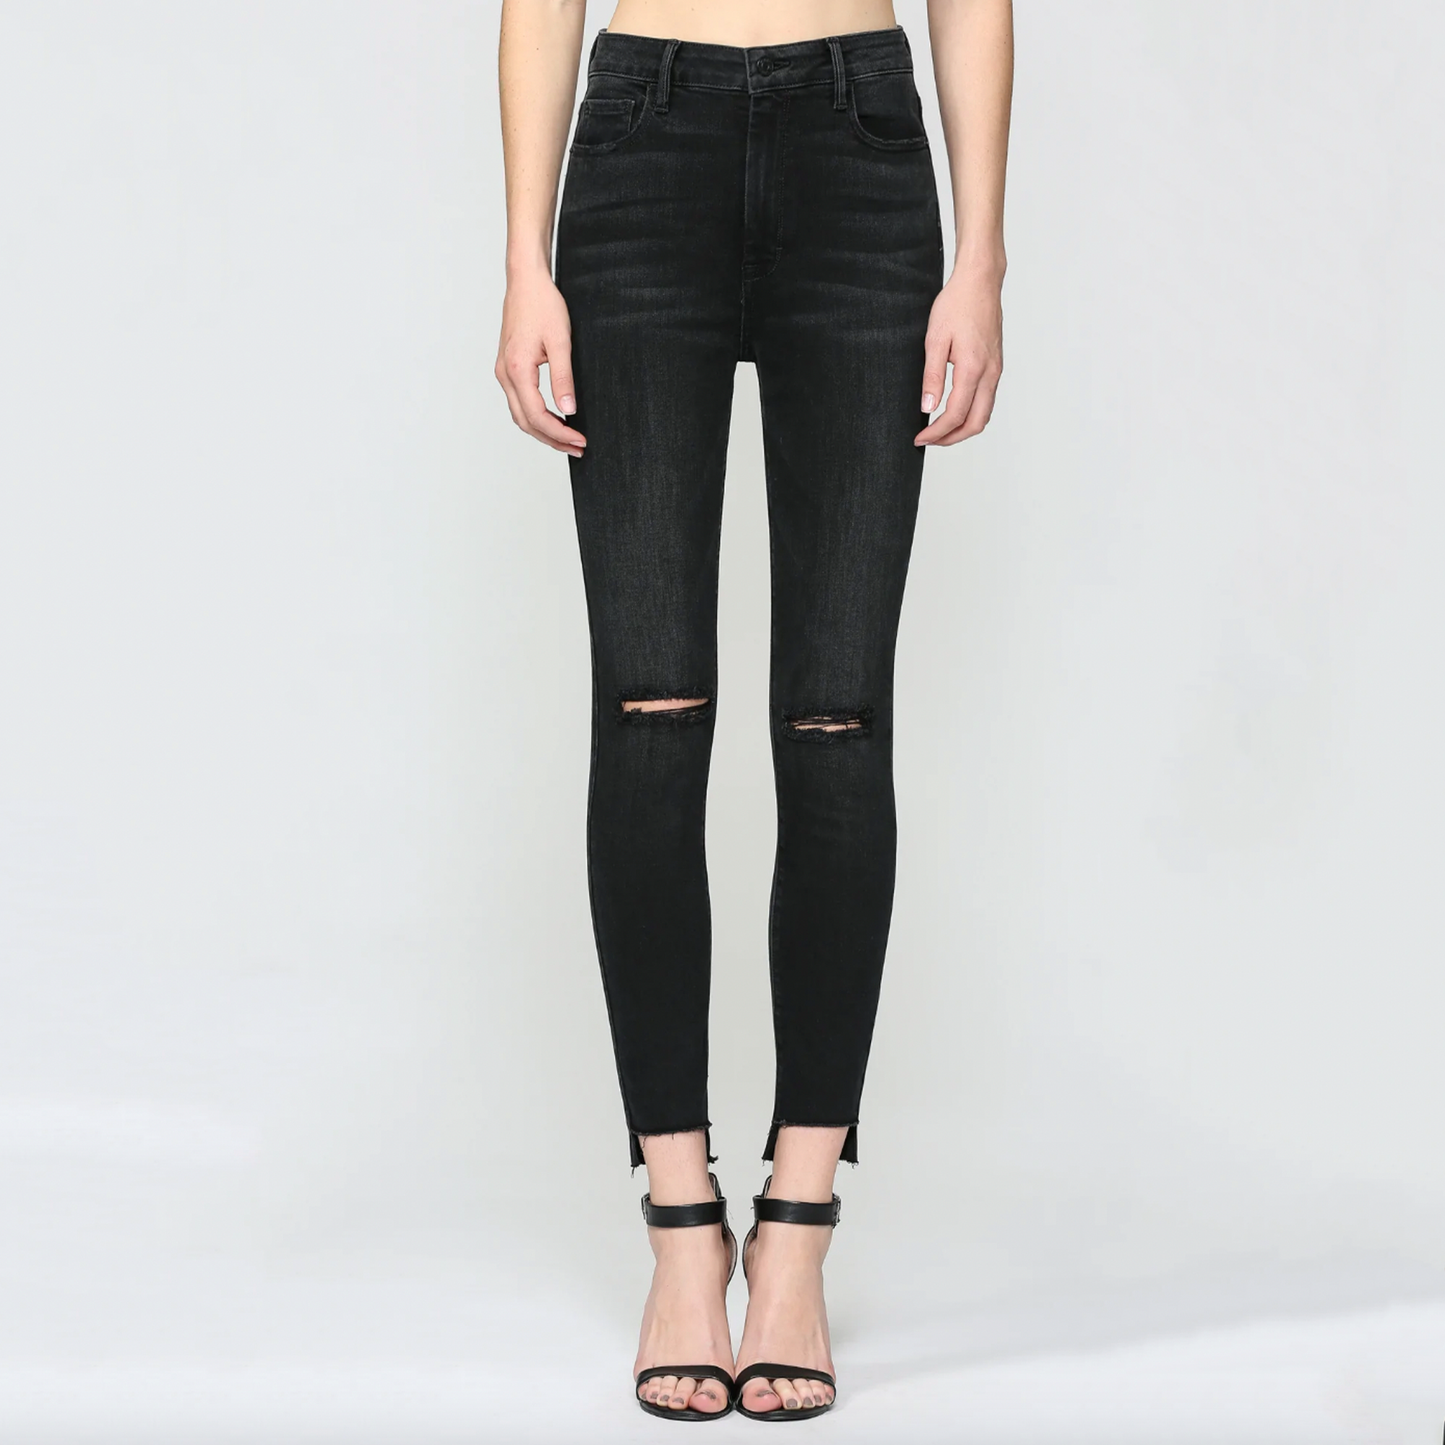 Hidden Taylor High Rise Crop Skinny. Everyone needs a pair of black wash high rise jeans. An addd bonus is the slit knee and step notched hem details. Amazing fit denim with an edgy feel